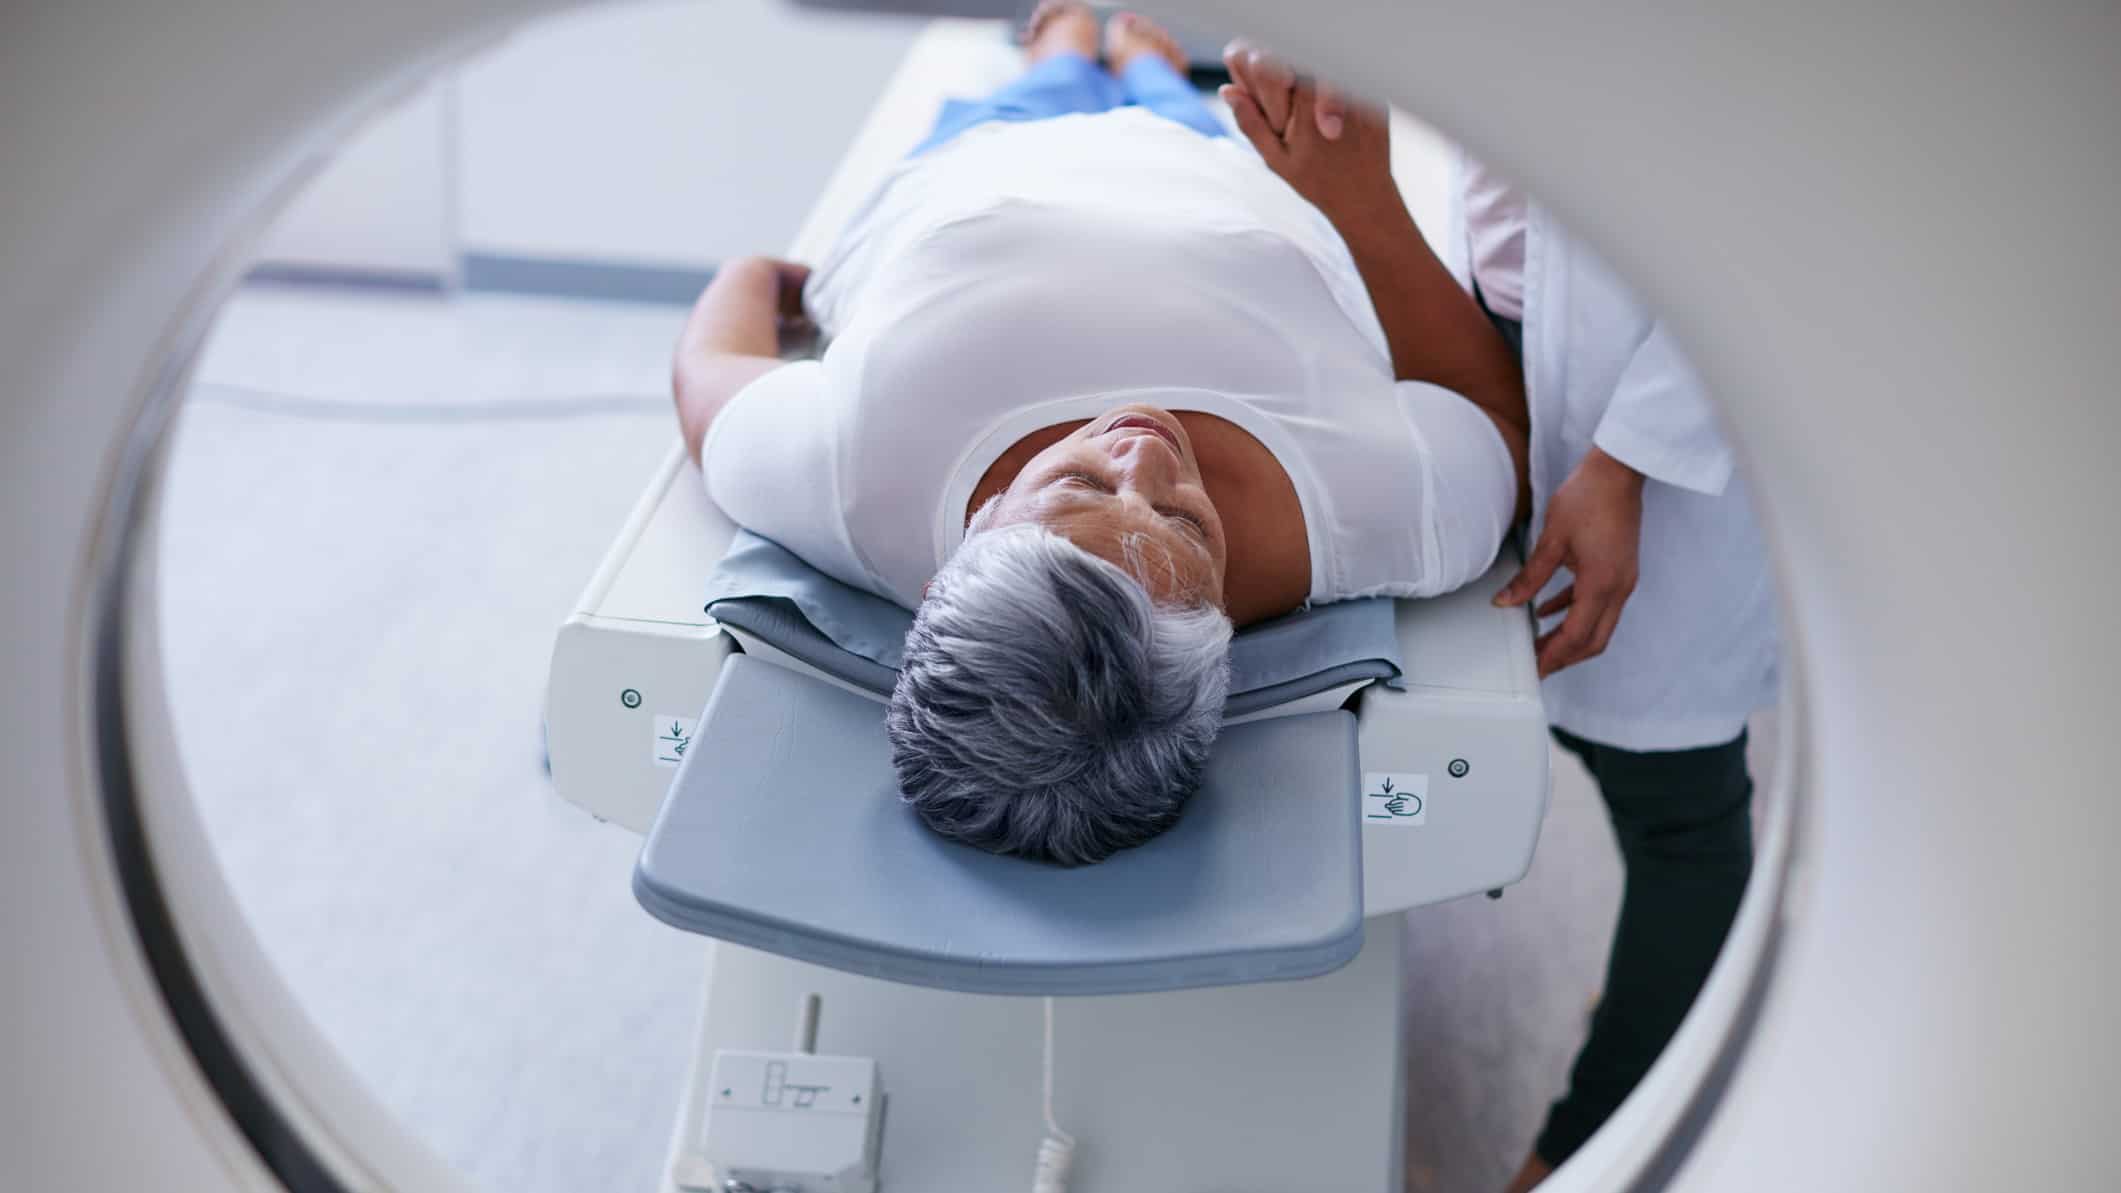 Woman going for a scan reassured by doctor